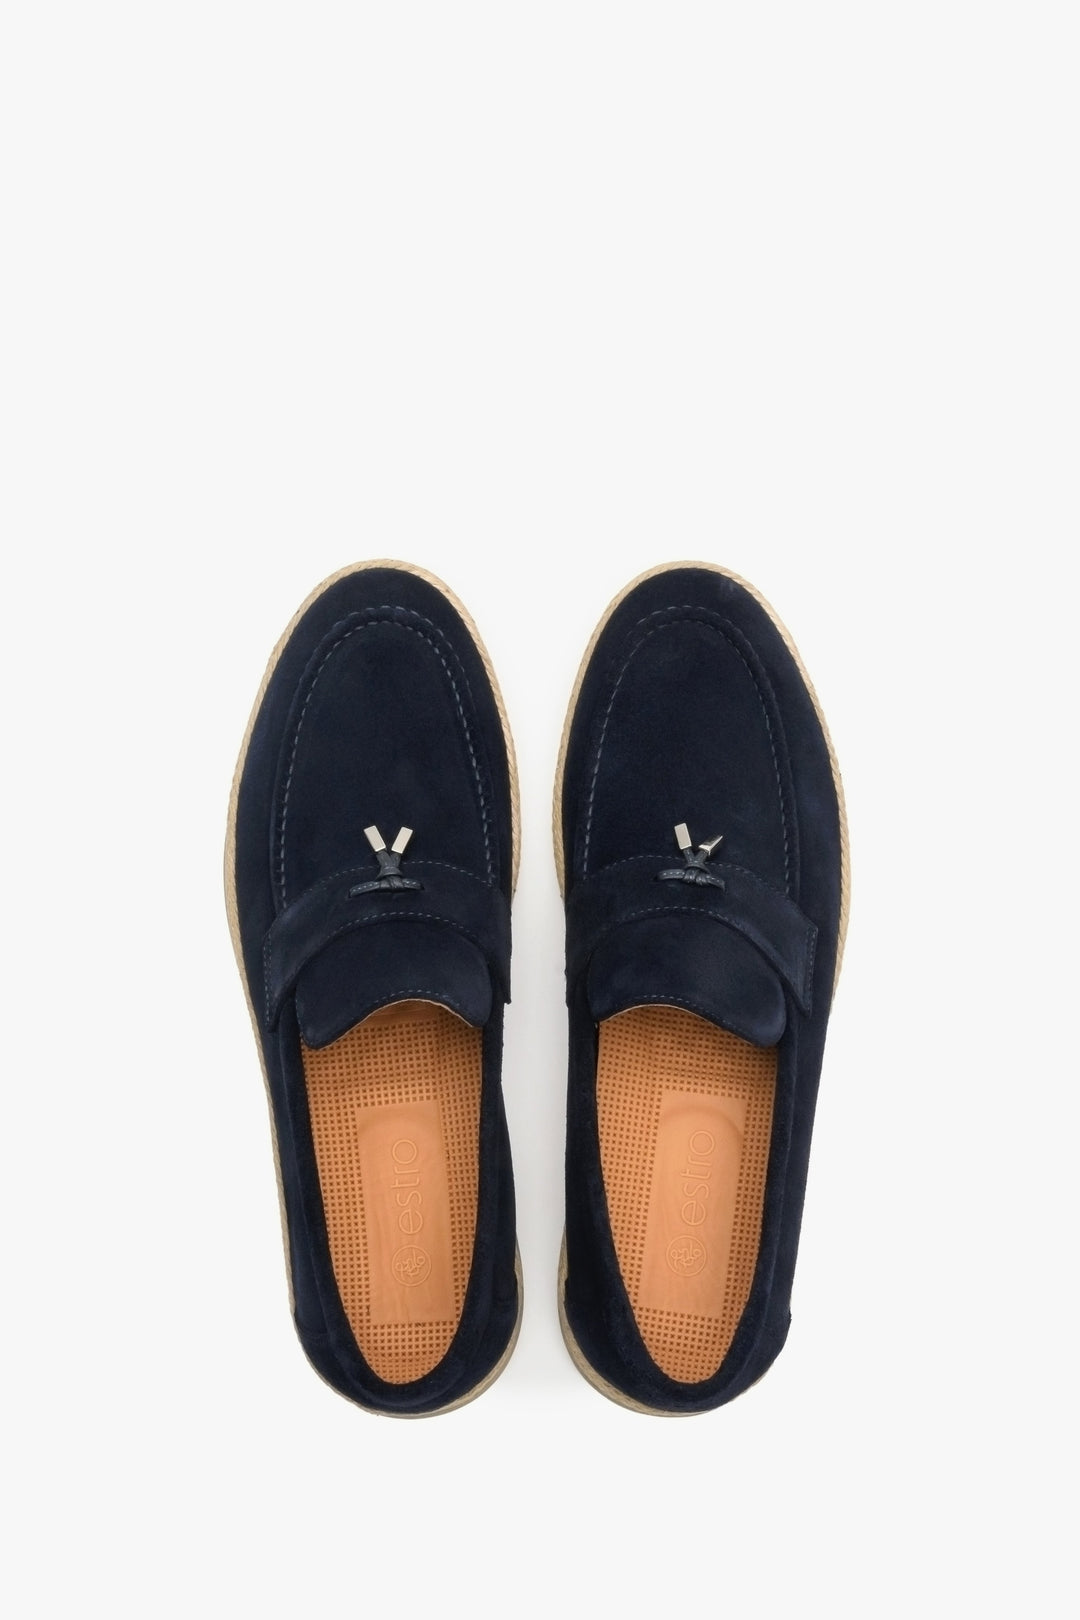 Estro men's navy blue fall loafers made of genuine velour - top view shoe presentation.